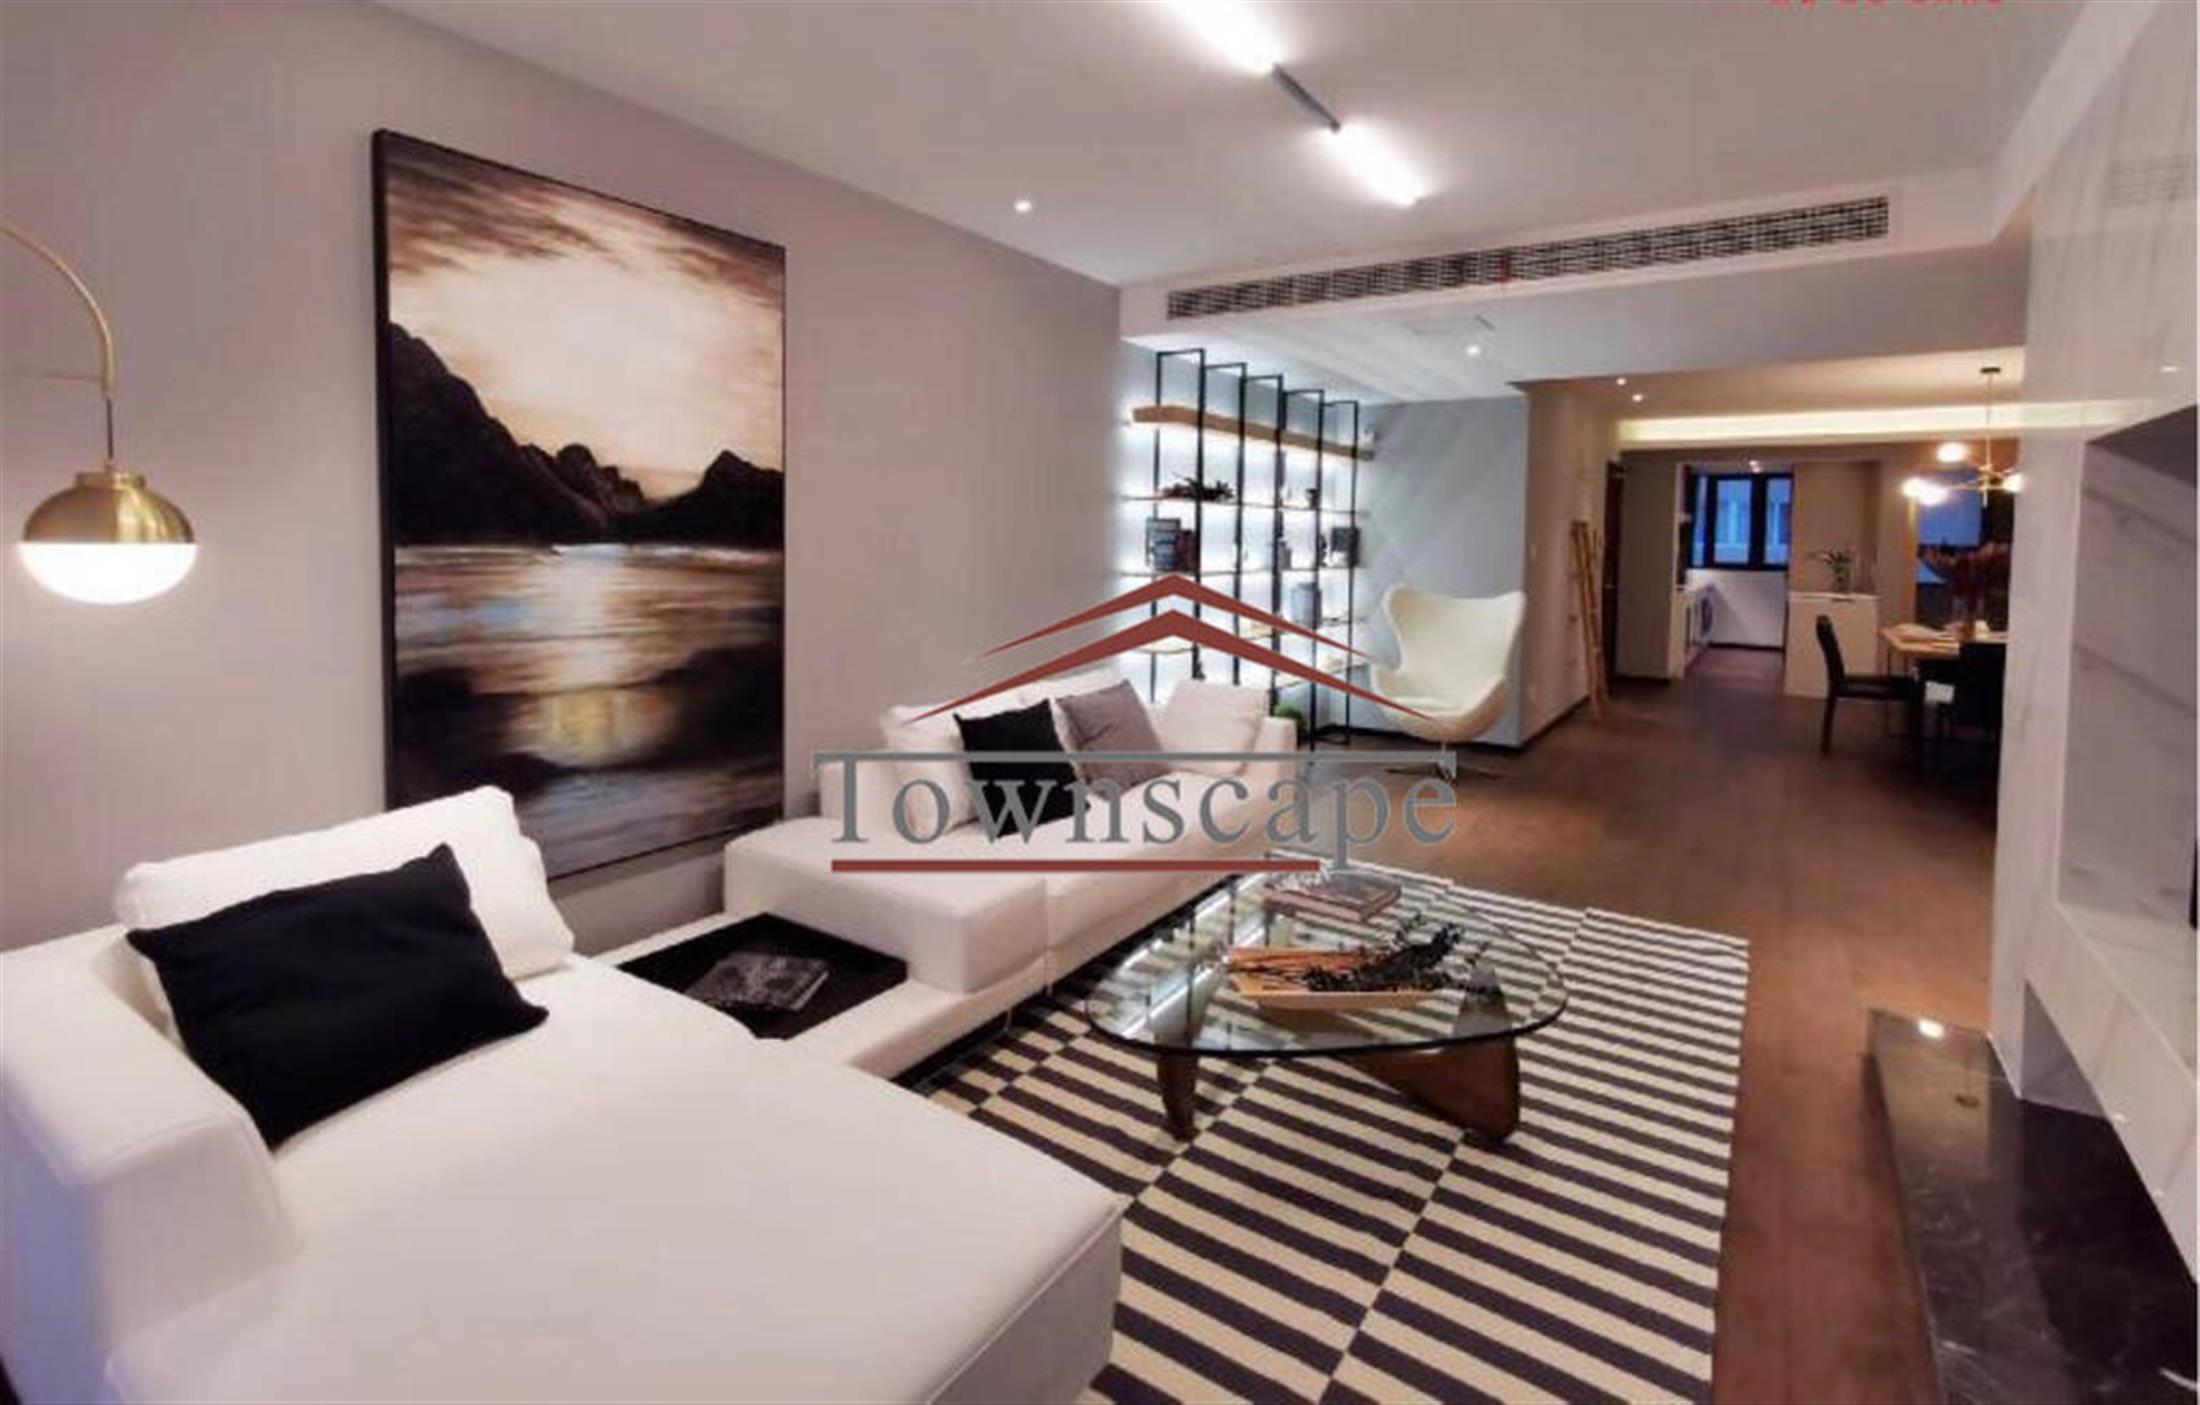 large living space New Gorgeous Spacious Modern High-Quality Apt nr SH Library for Rent